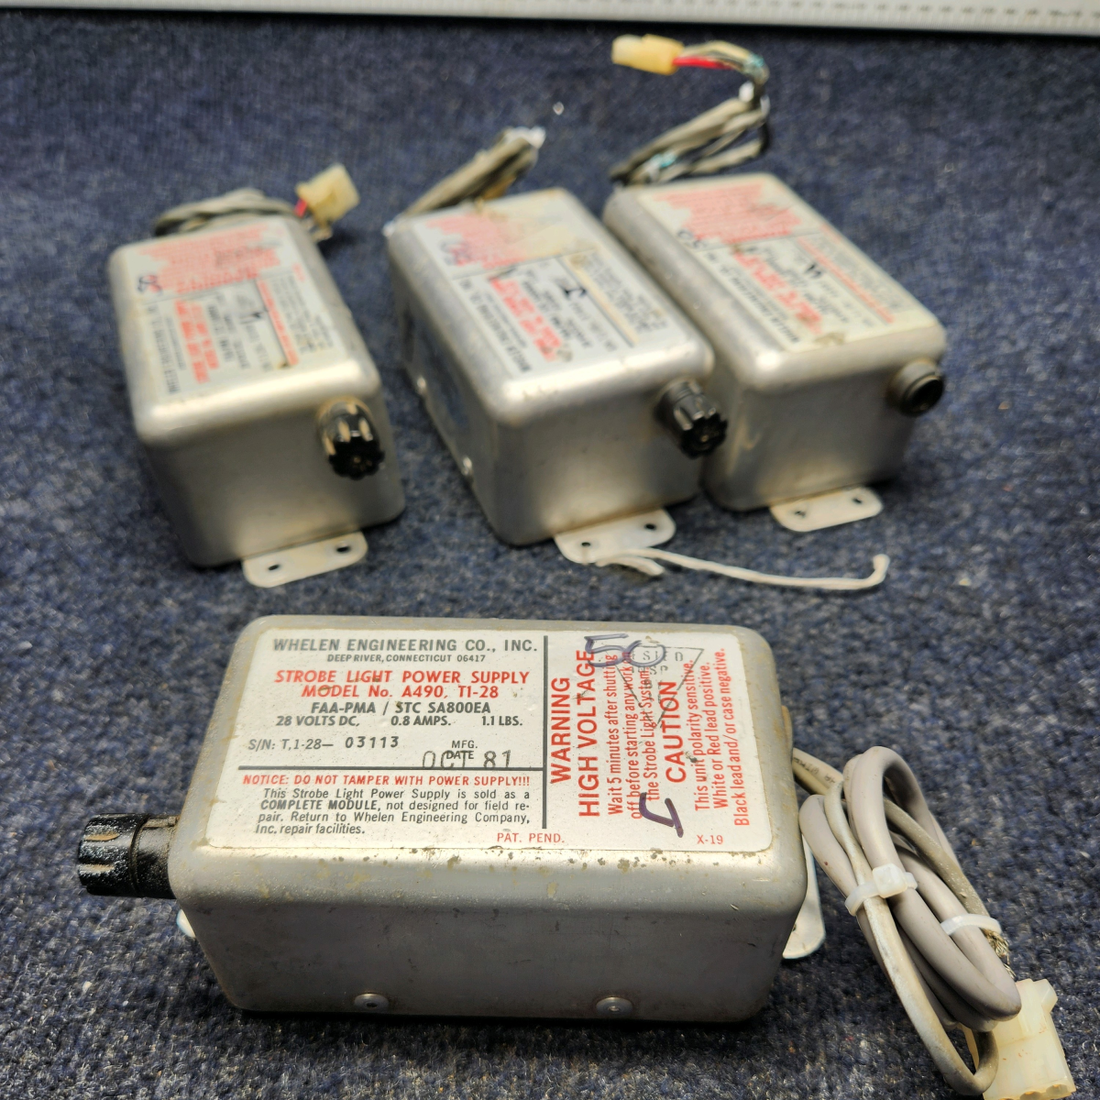 Used aircraft parts for sale, A490, T1-28 Whelen Strobe Power Supply WHELEN STROBE LIGHT POWER SUPPLY "FOR PARTS ONLY" 28VOLTS